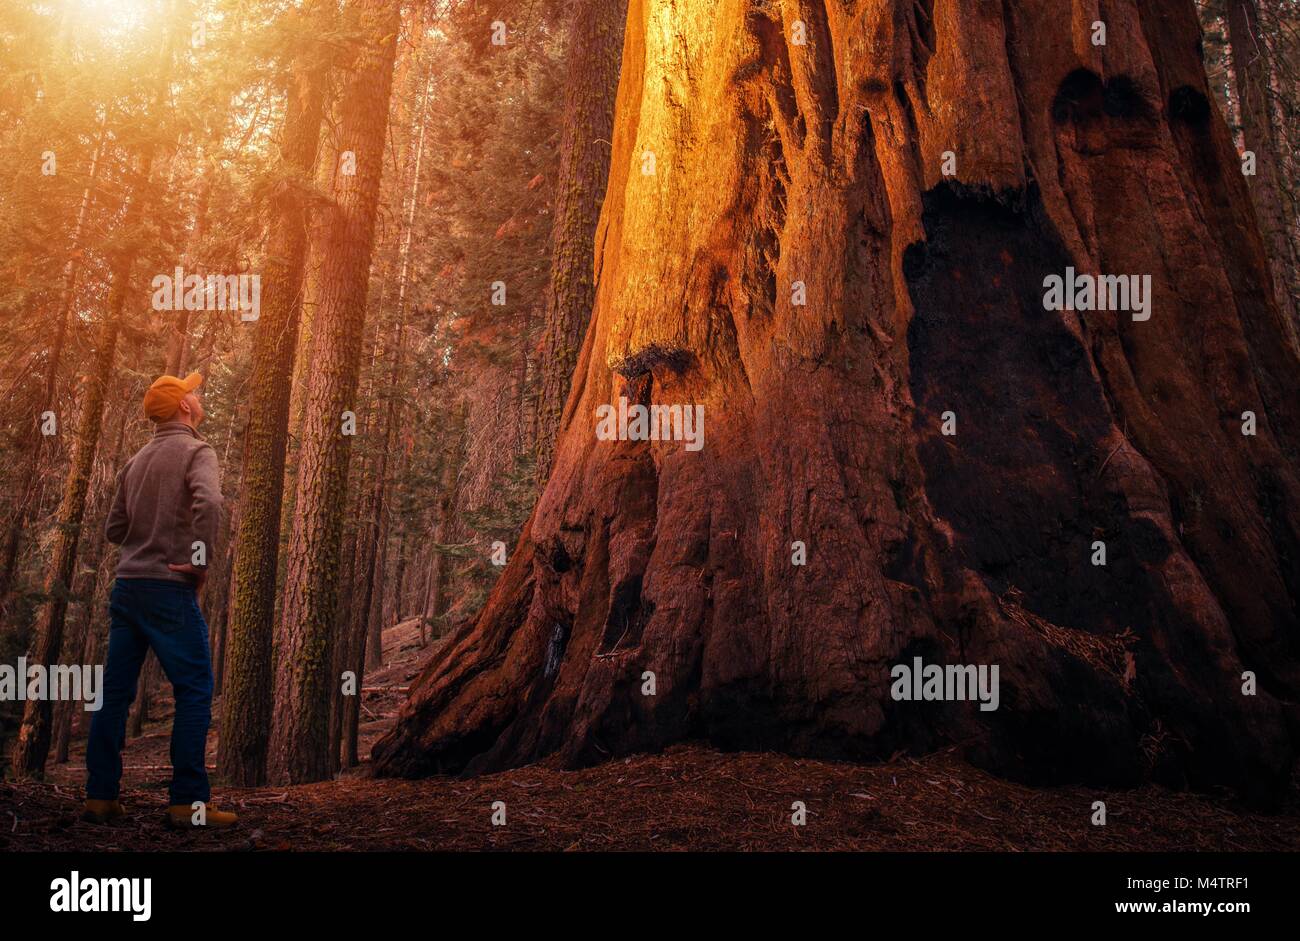 Ancient Sequoia Forest Explorer. Caucasian Hiker Taking Close Look at the Giant Sequoia Tree in the Sierra Nevada Mountains. California, United States Stock Photo